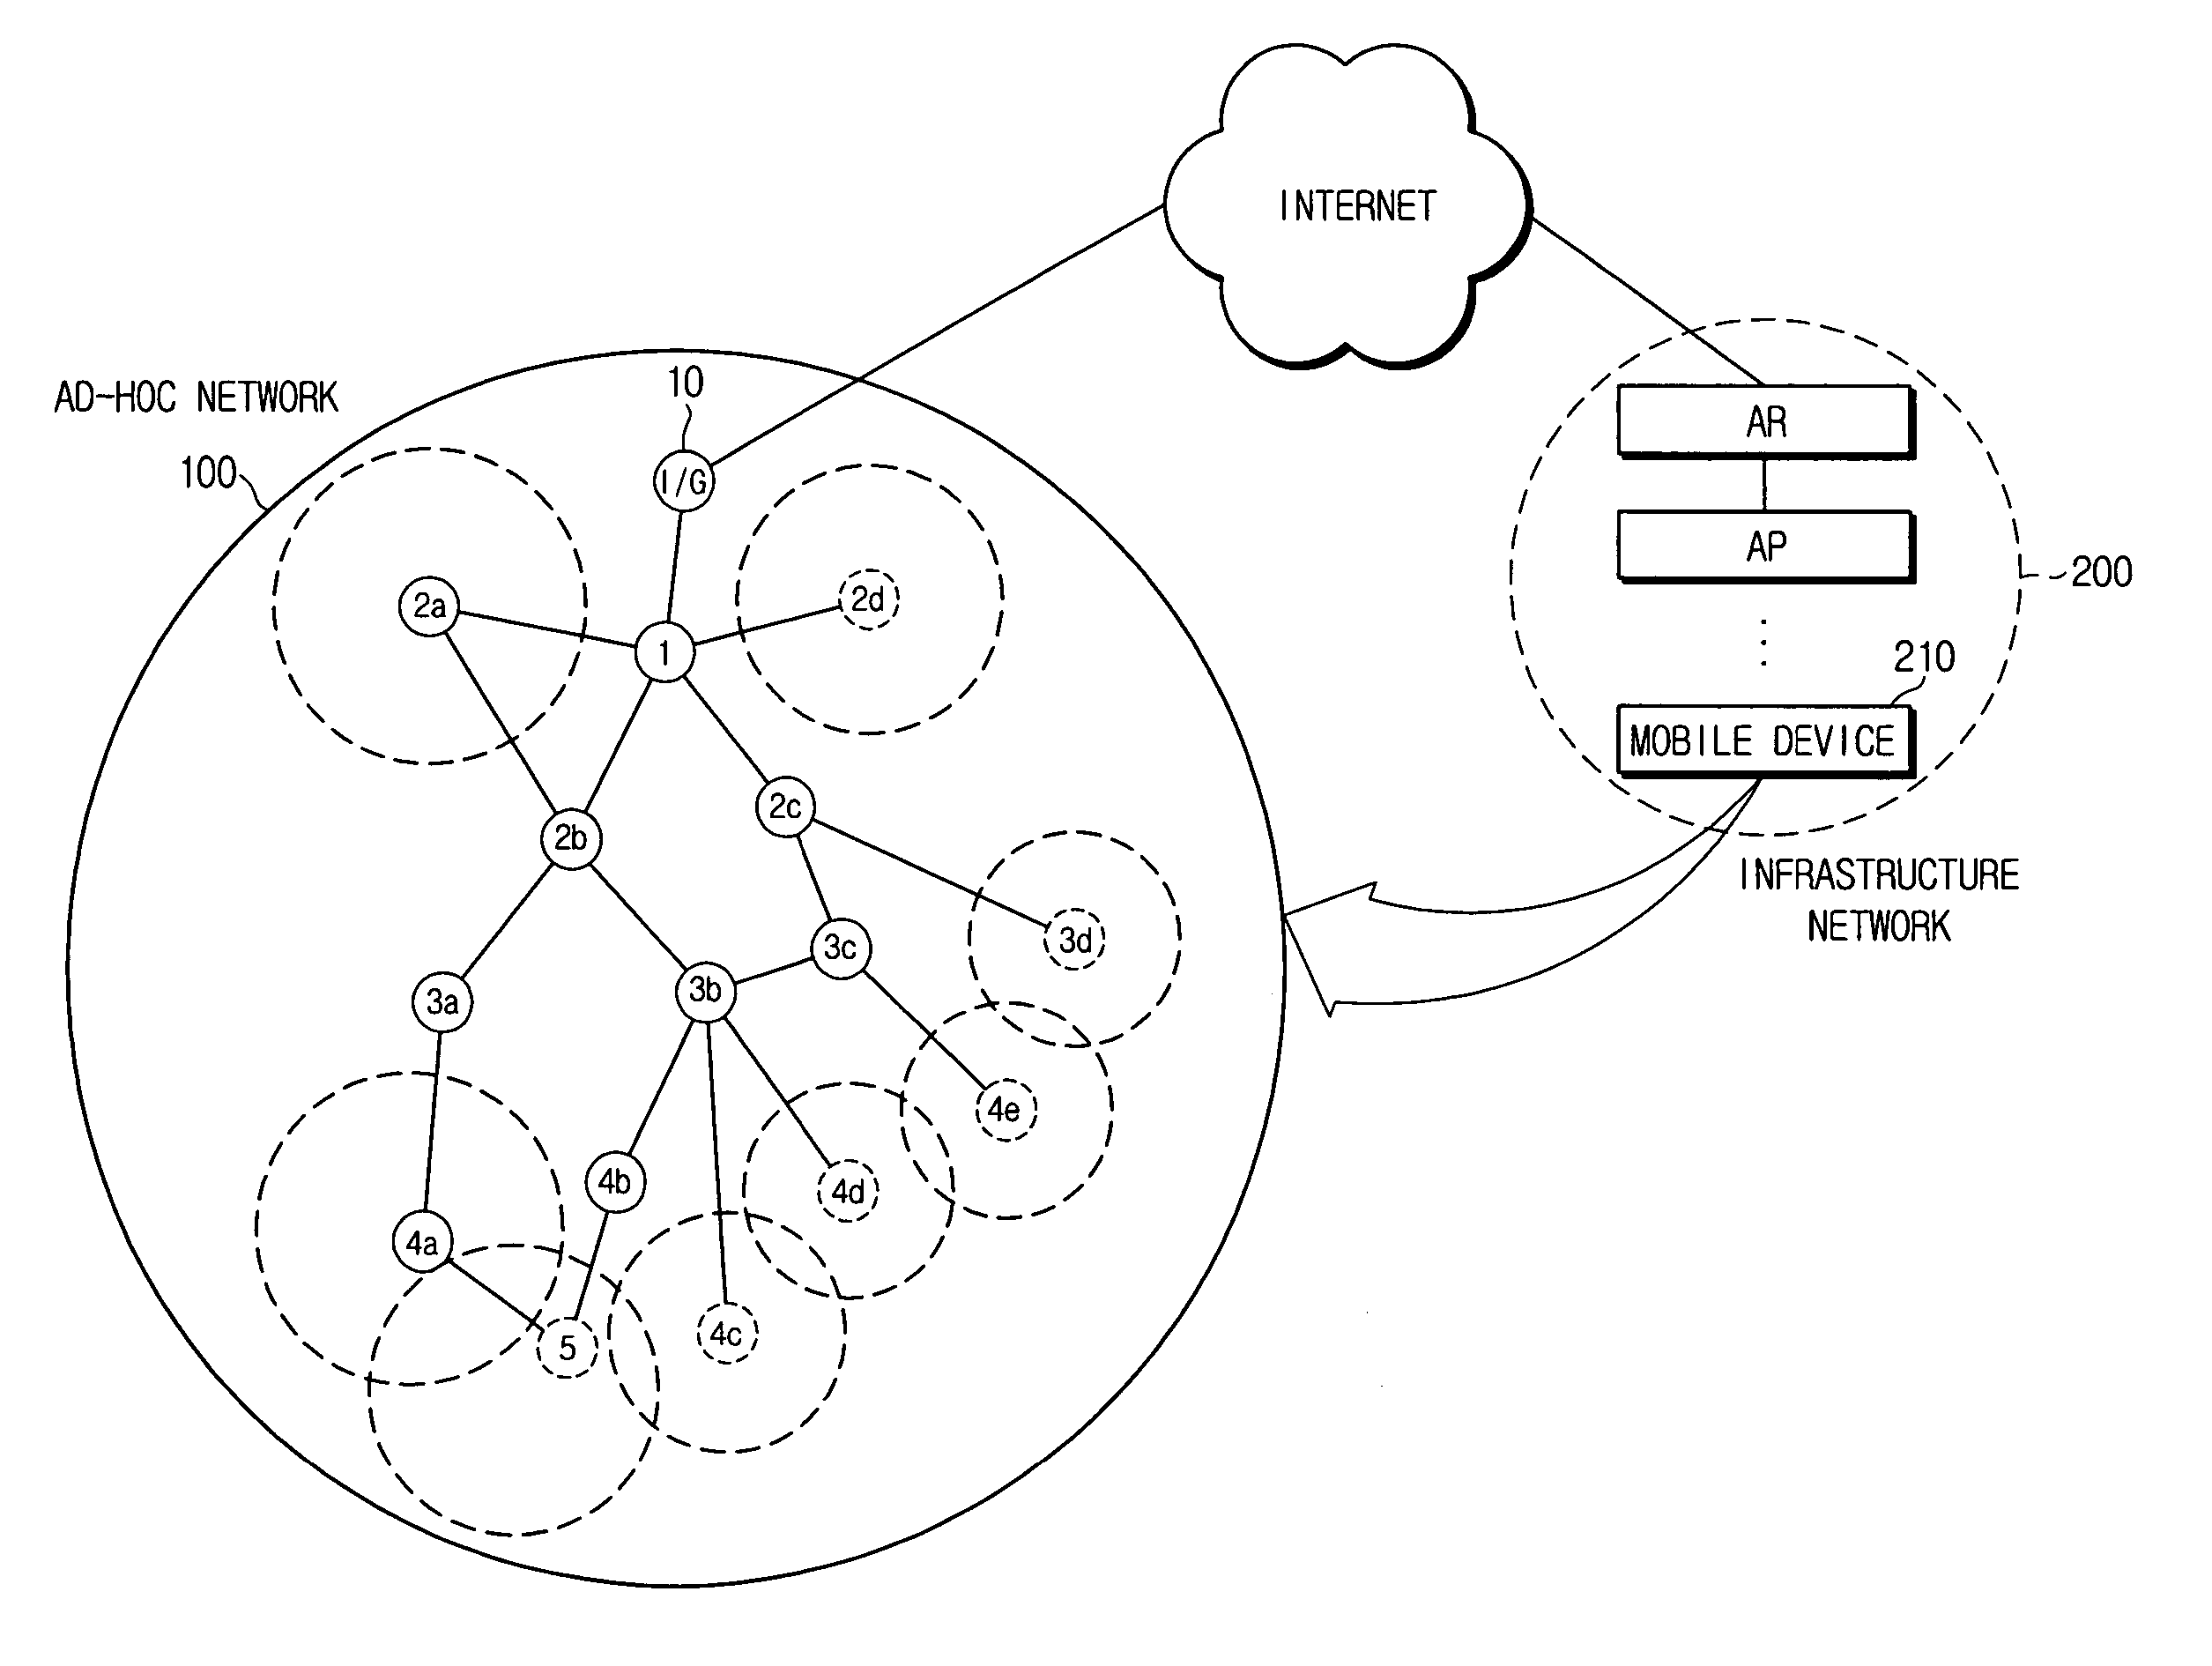 Hand-off method using edge nodes in mobile ad-hoc network